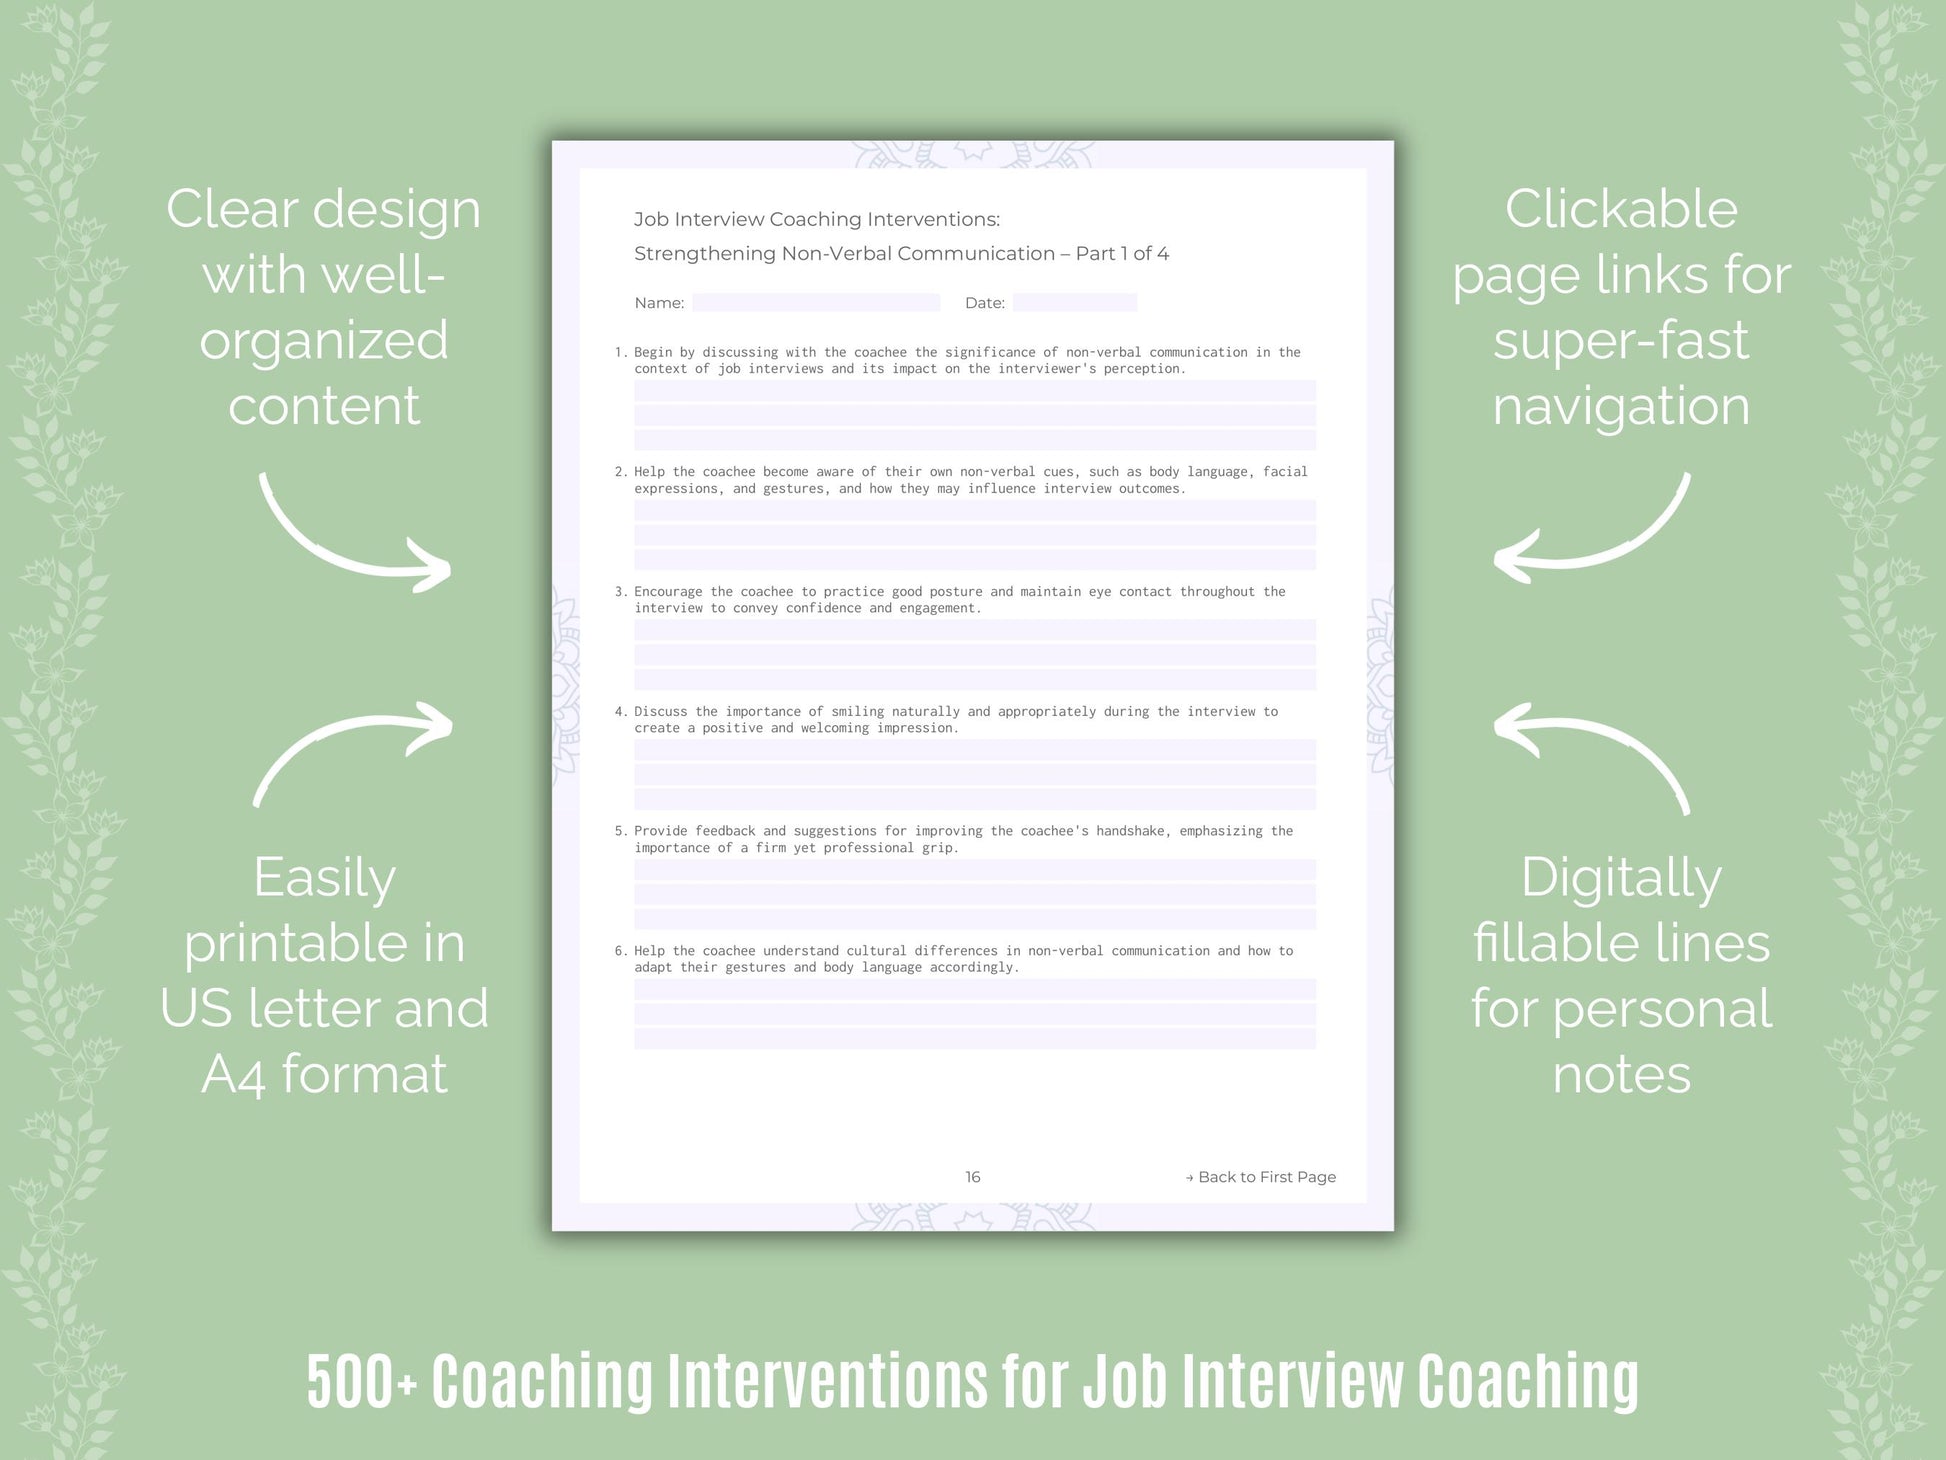 Job Interview Coaching Interventions Resource